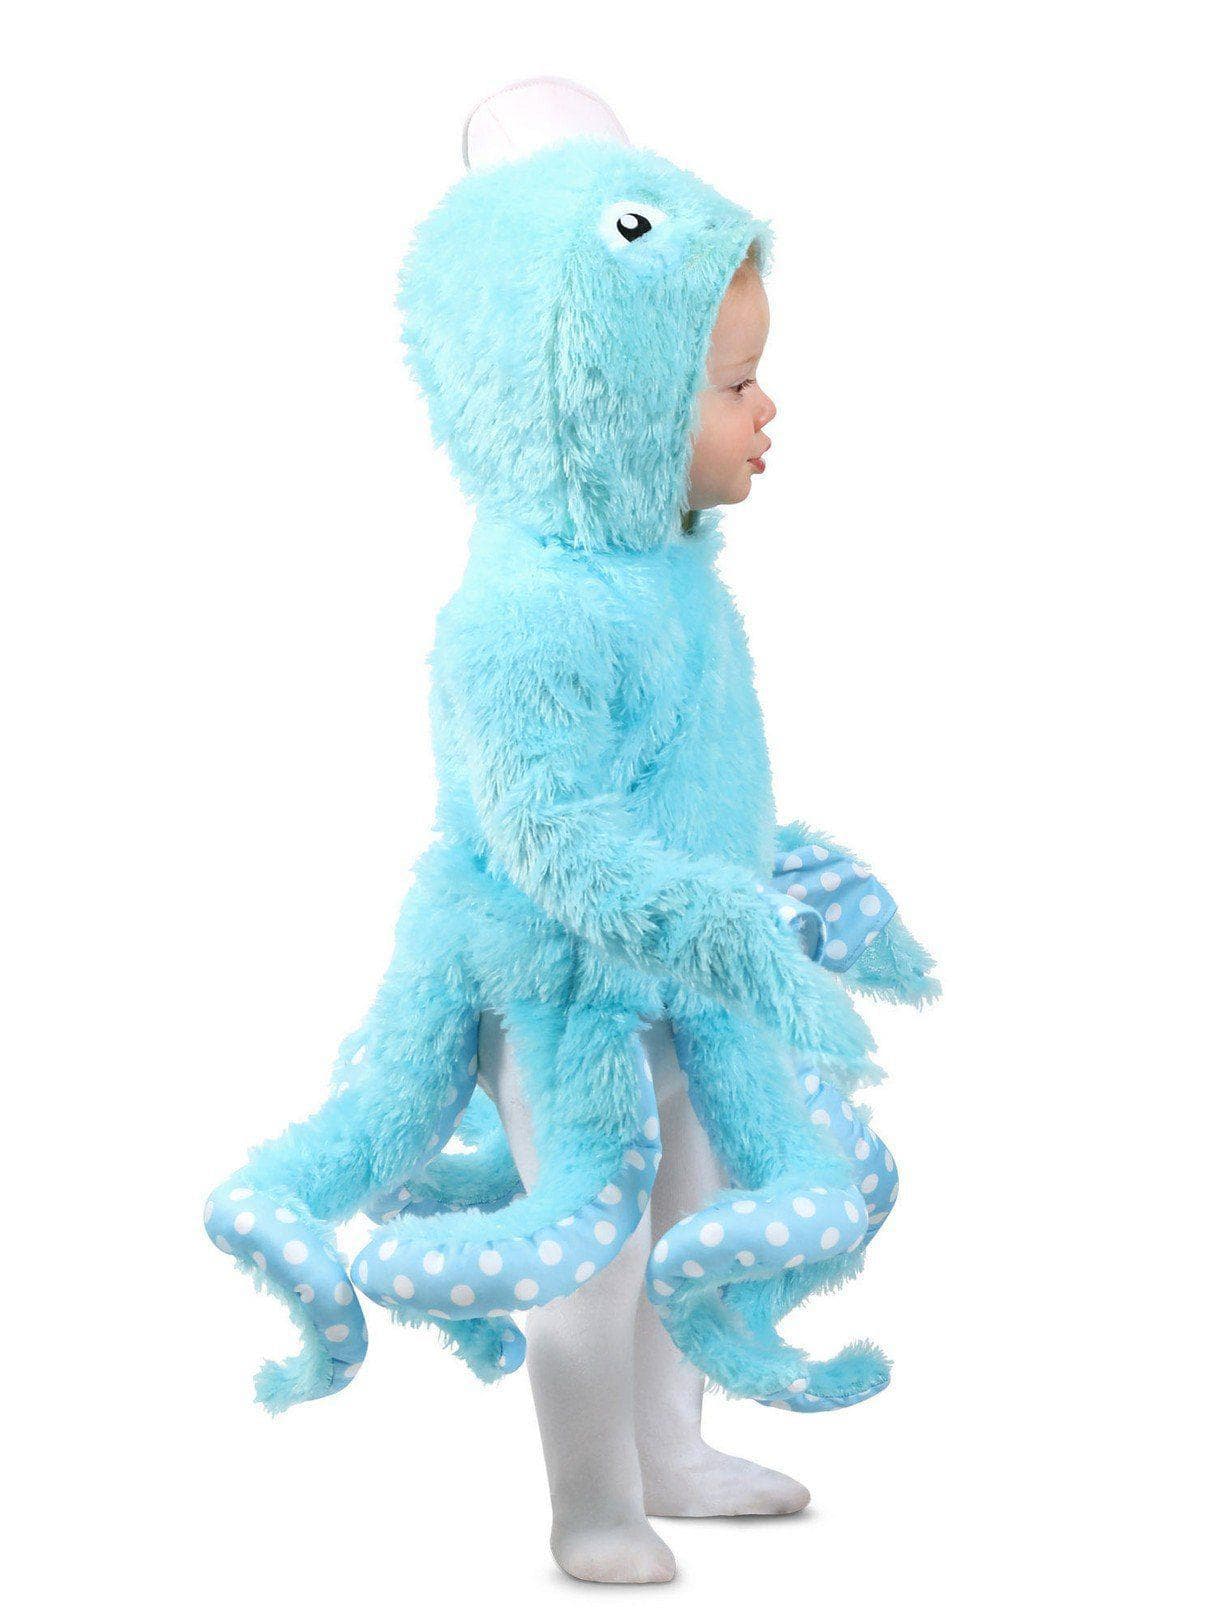 Baby/Toddler Octopus Costume - costumes.com